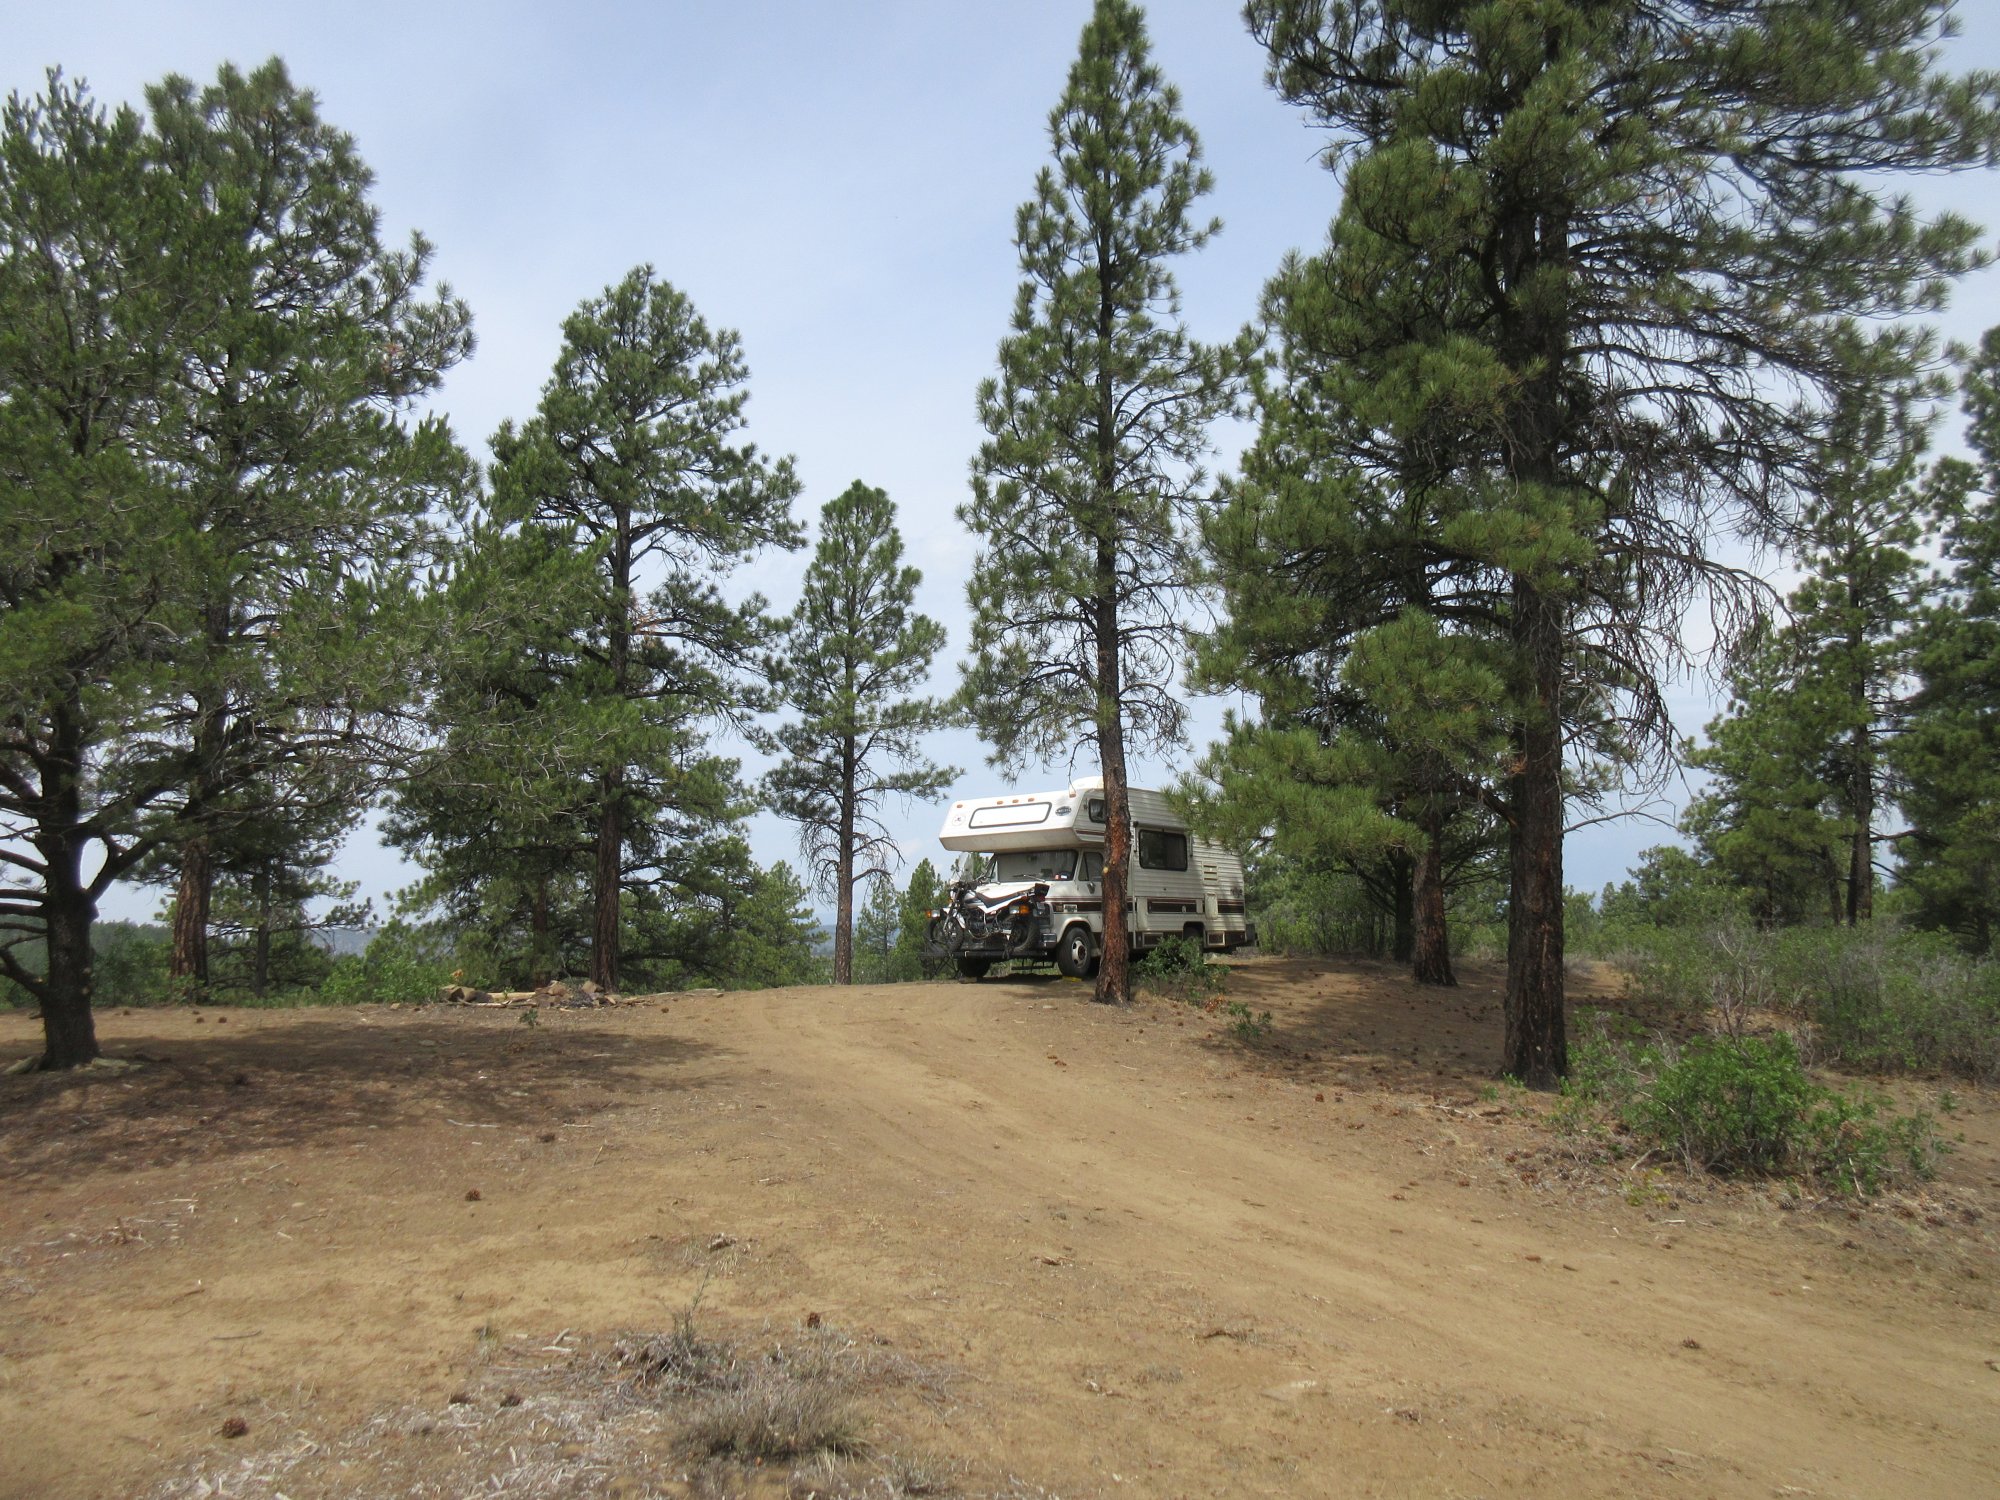 Protecting Our Public Lands: Escapees RV Club’s RVers Boondocking Policy 3